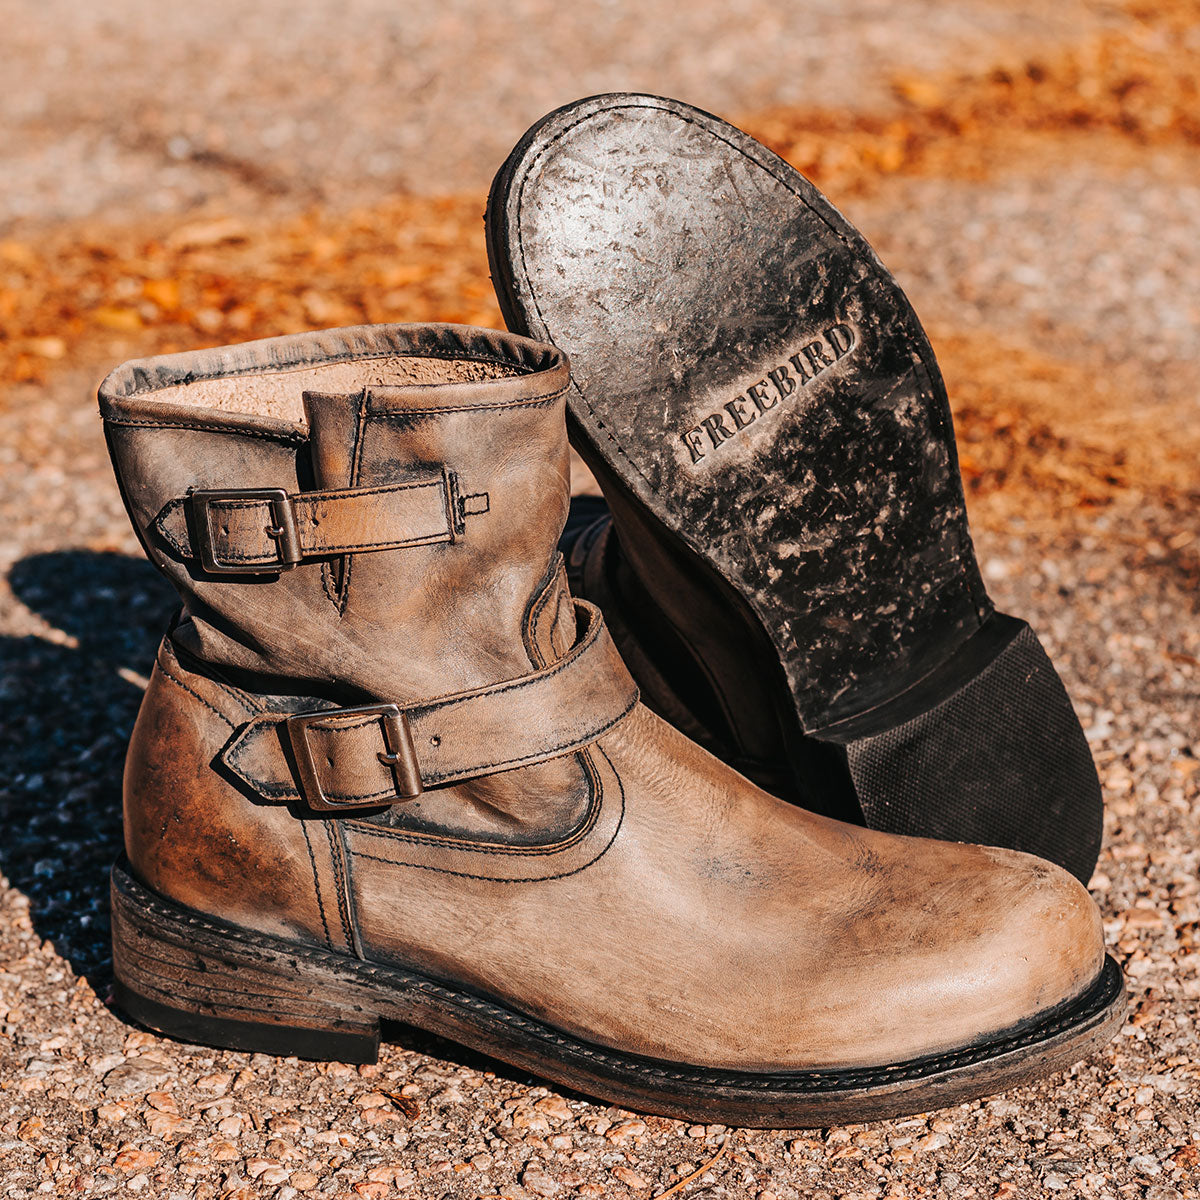 FREEBIRD men's Charles stone leather boot with full grain leather, dual leather straps and a rounded toe